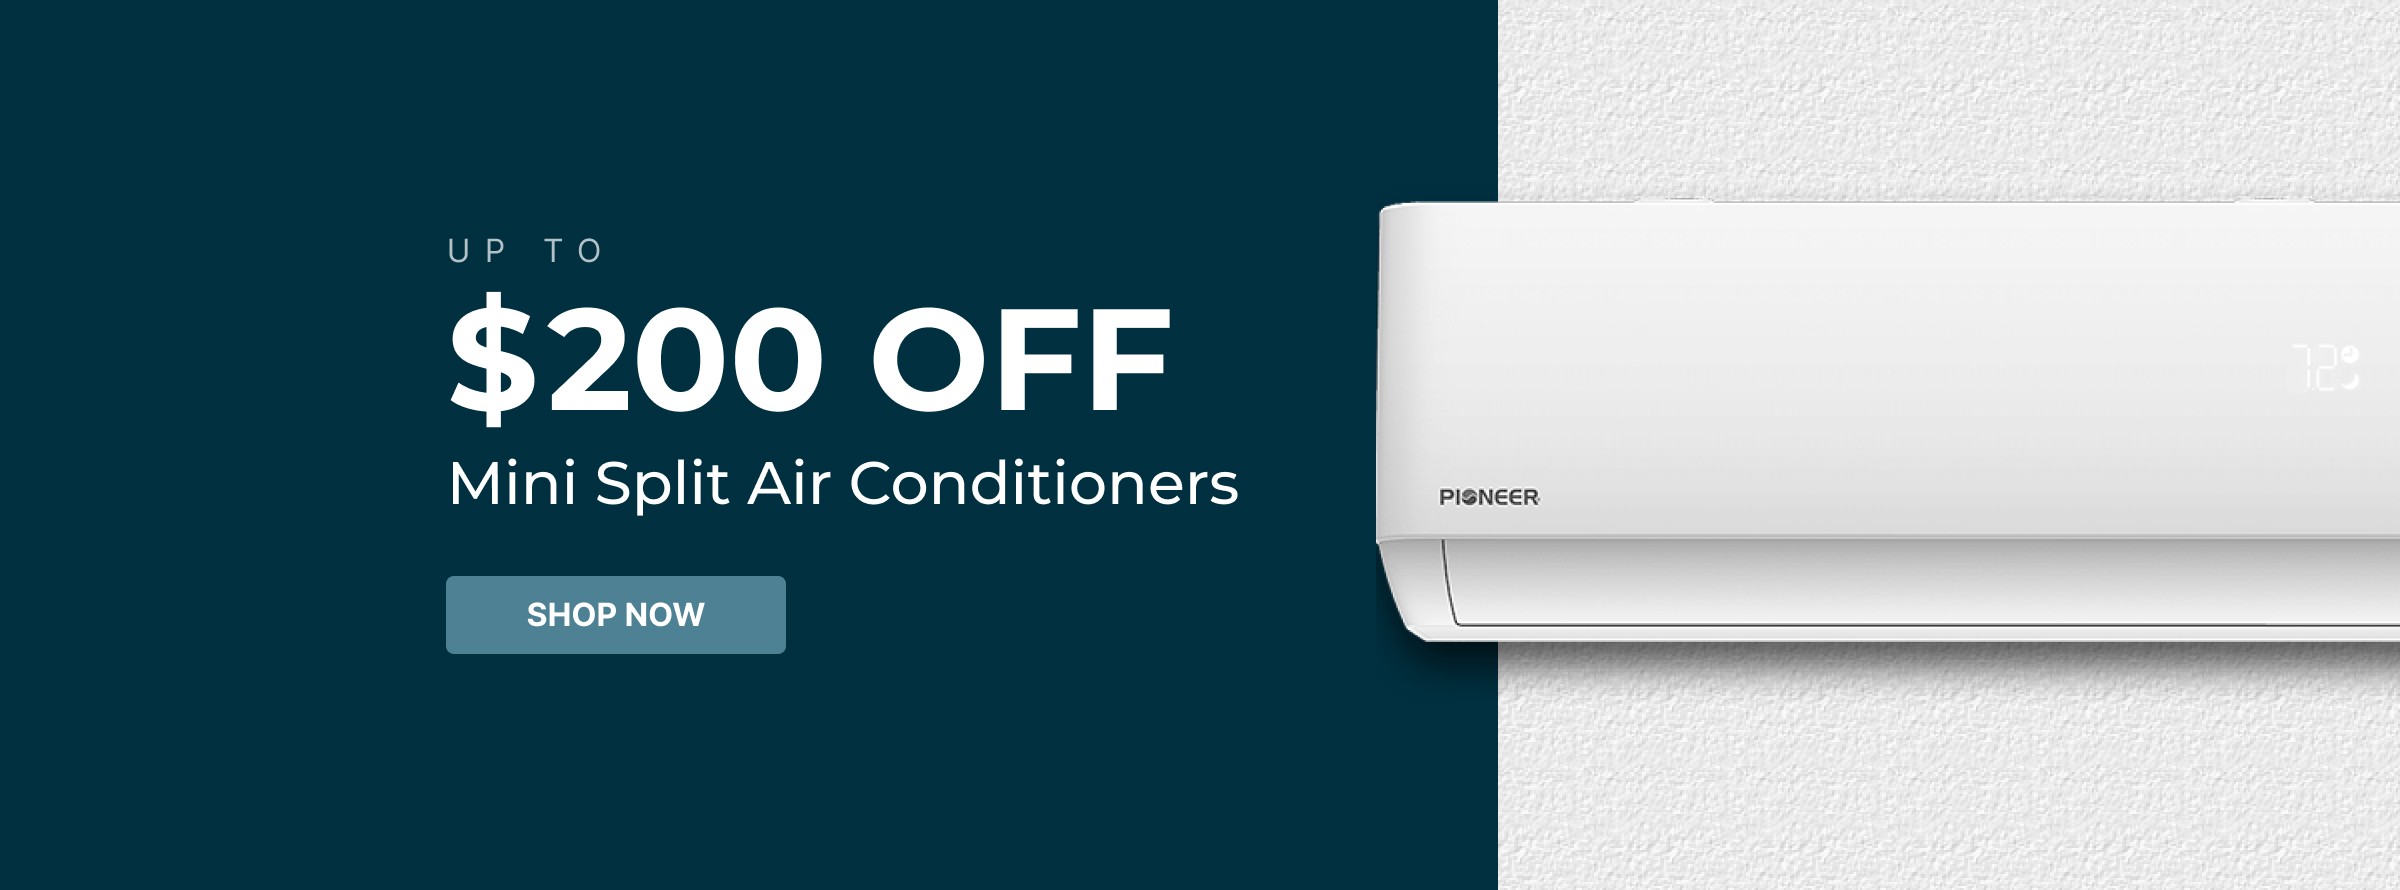 Up to $200 off Mini Split Air Conditioners